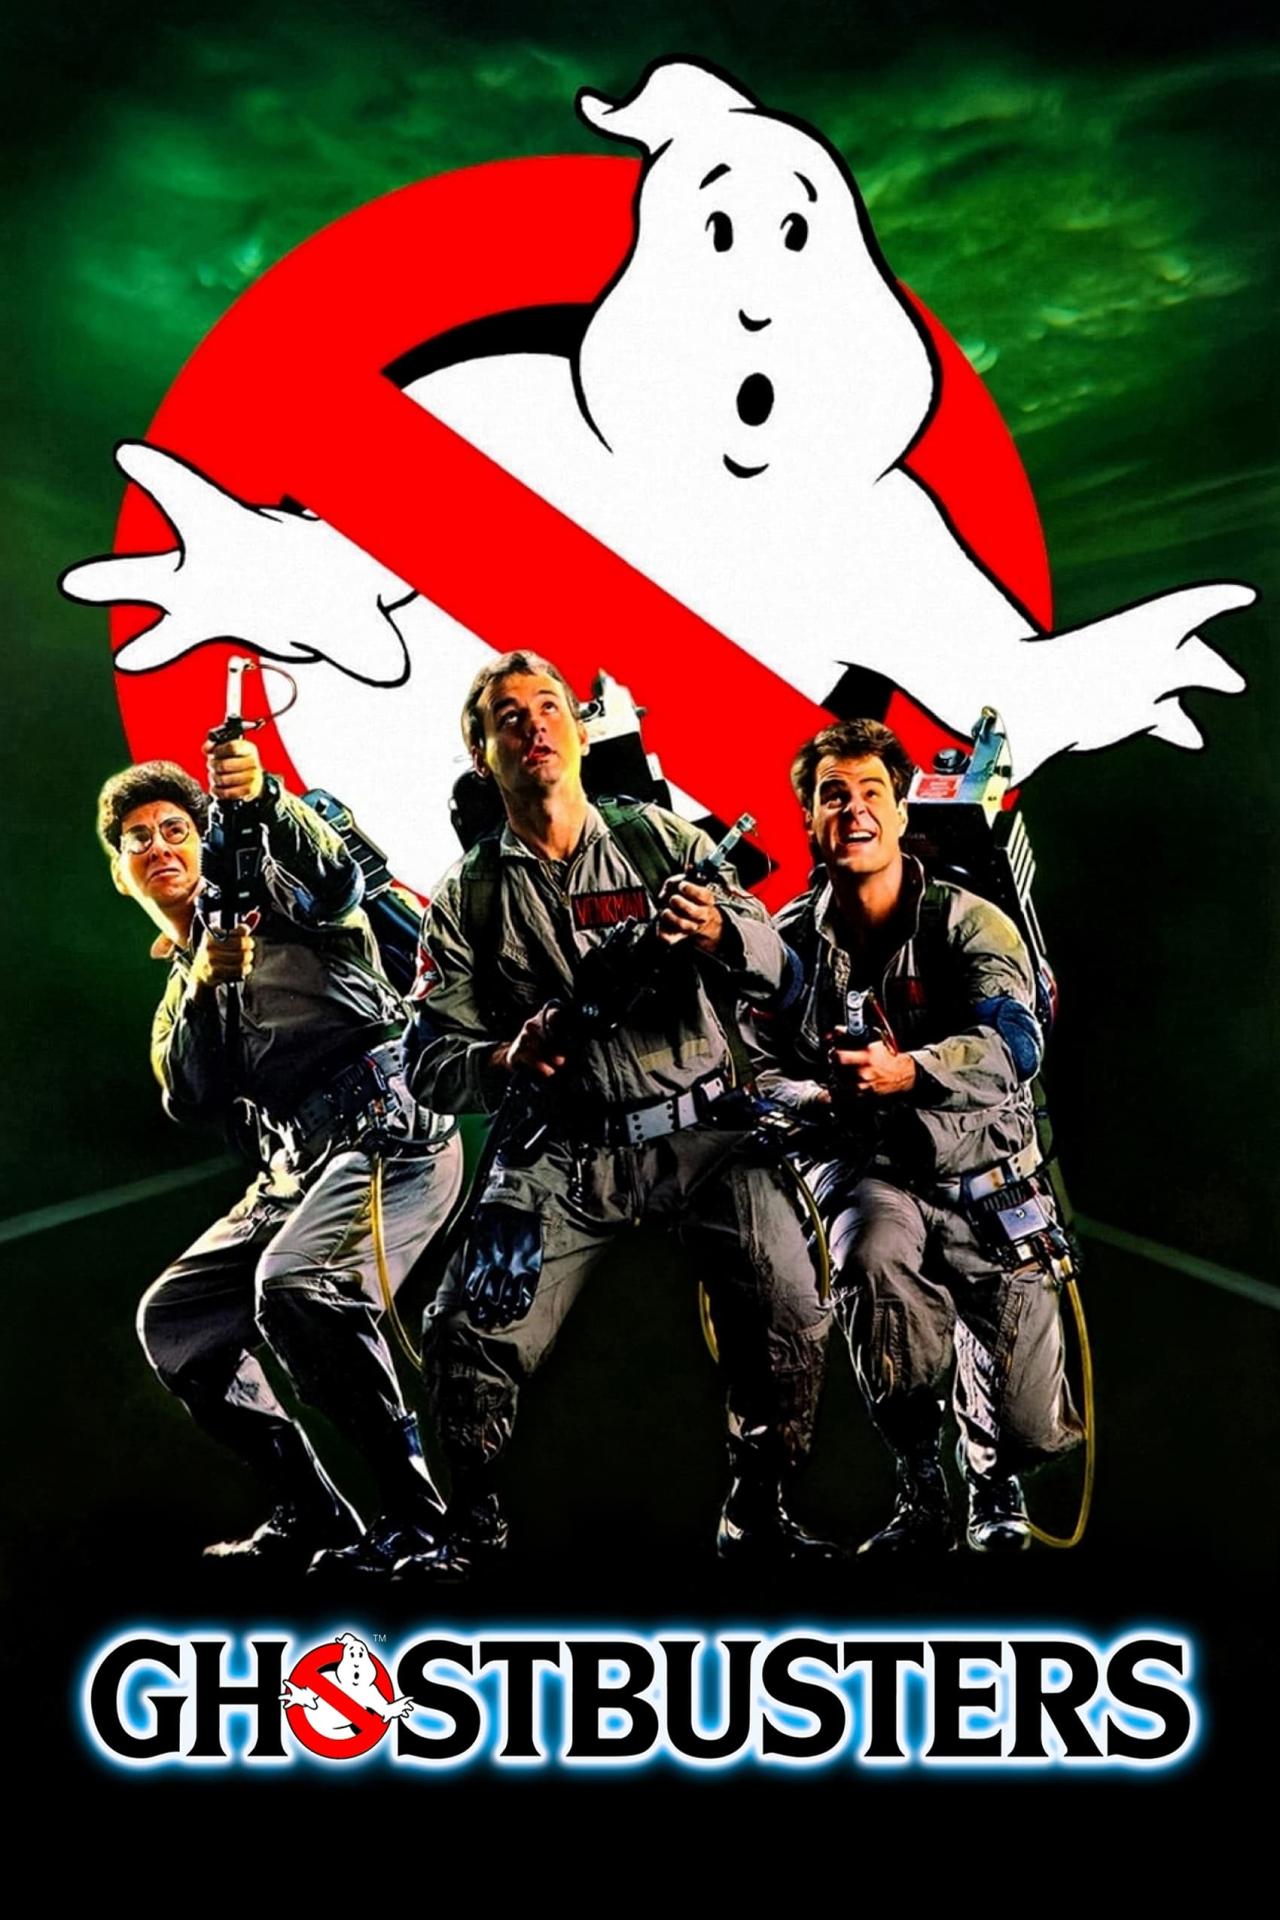 Affiche du film Ghostbusters poster